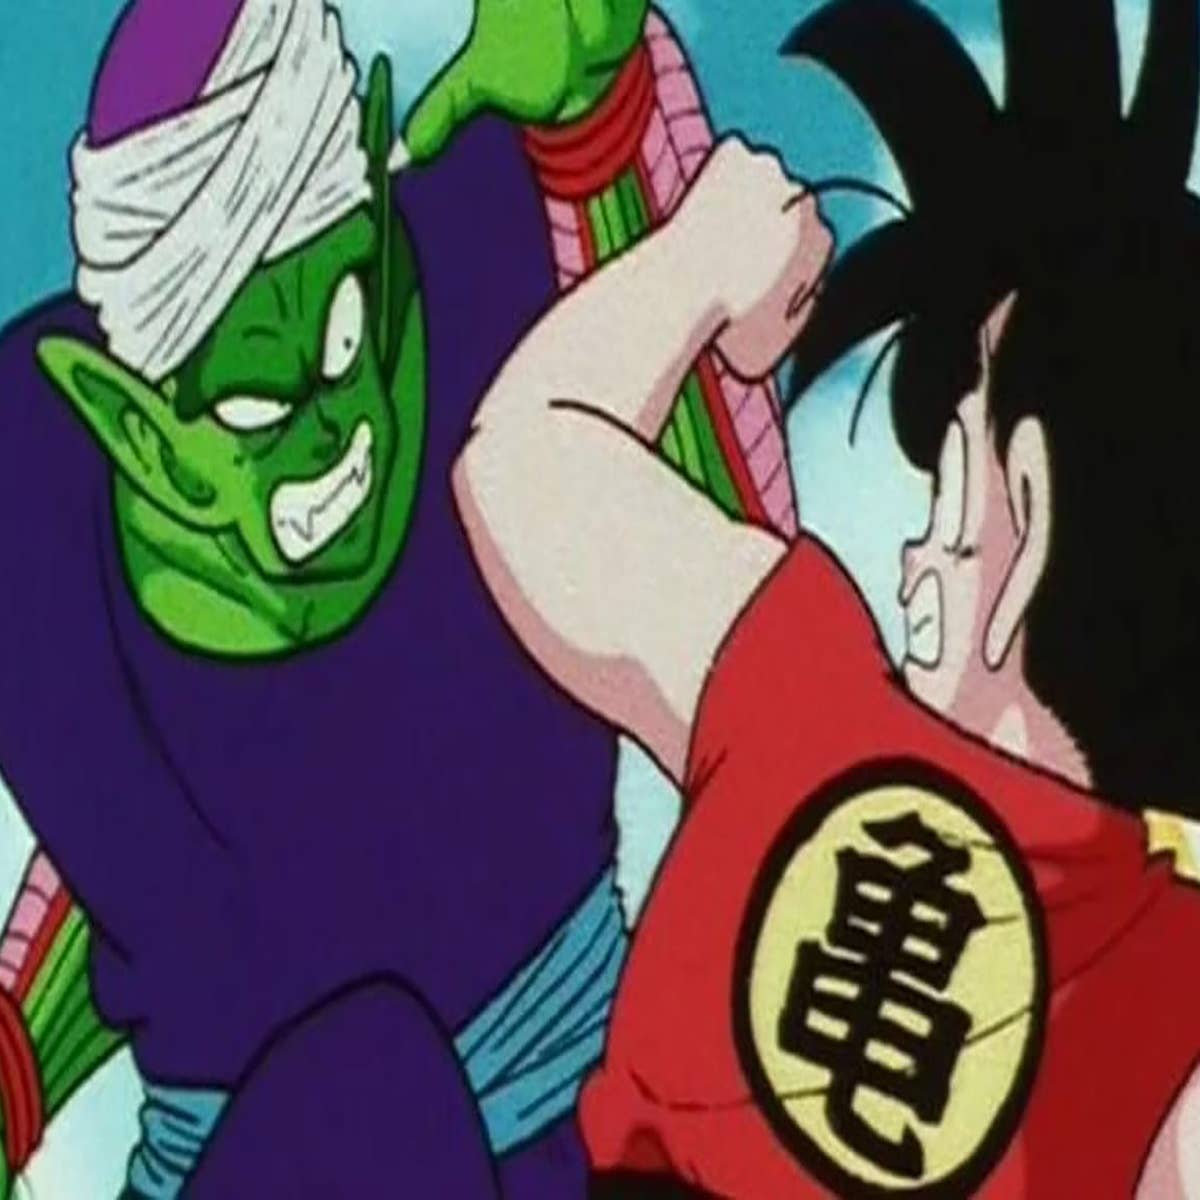 Dragon Ball in chronological order to view the entire series, movies and  manga - Meristation